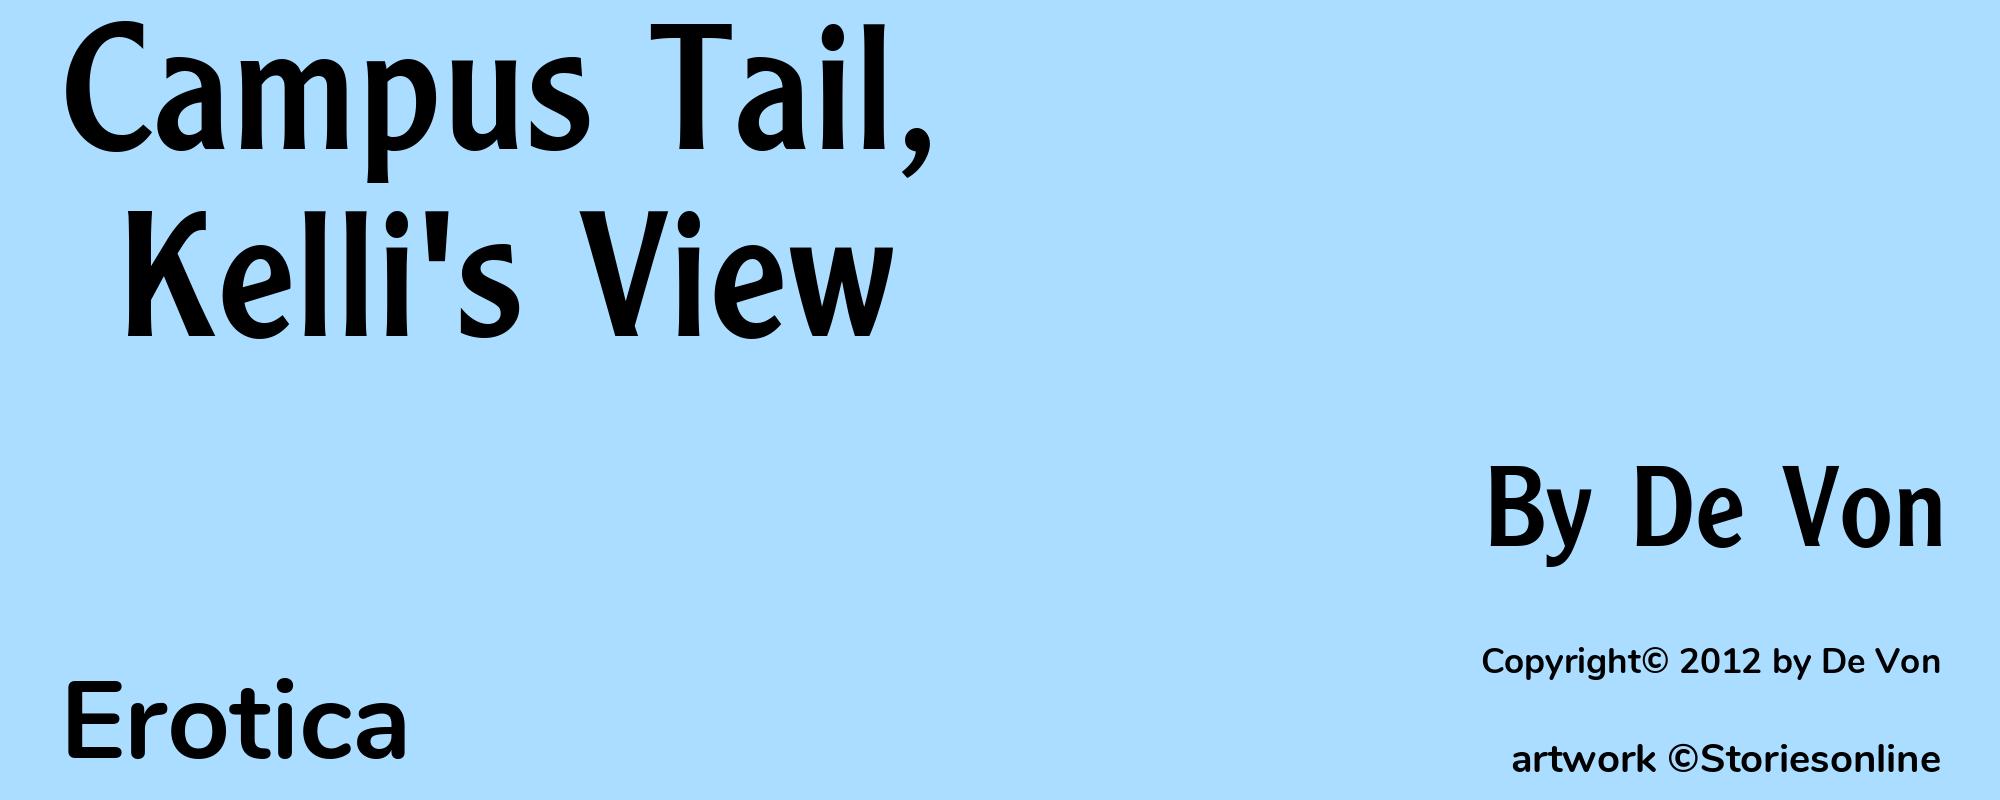 Campus Tail, Kelli's View - Cover